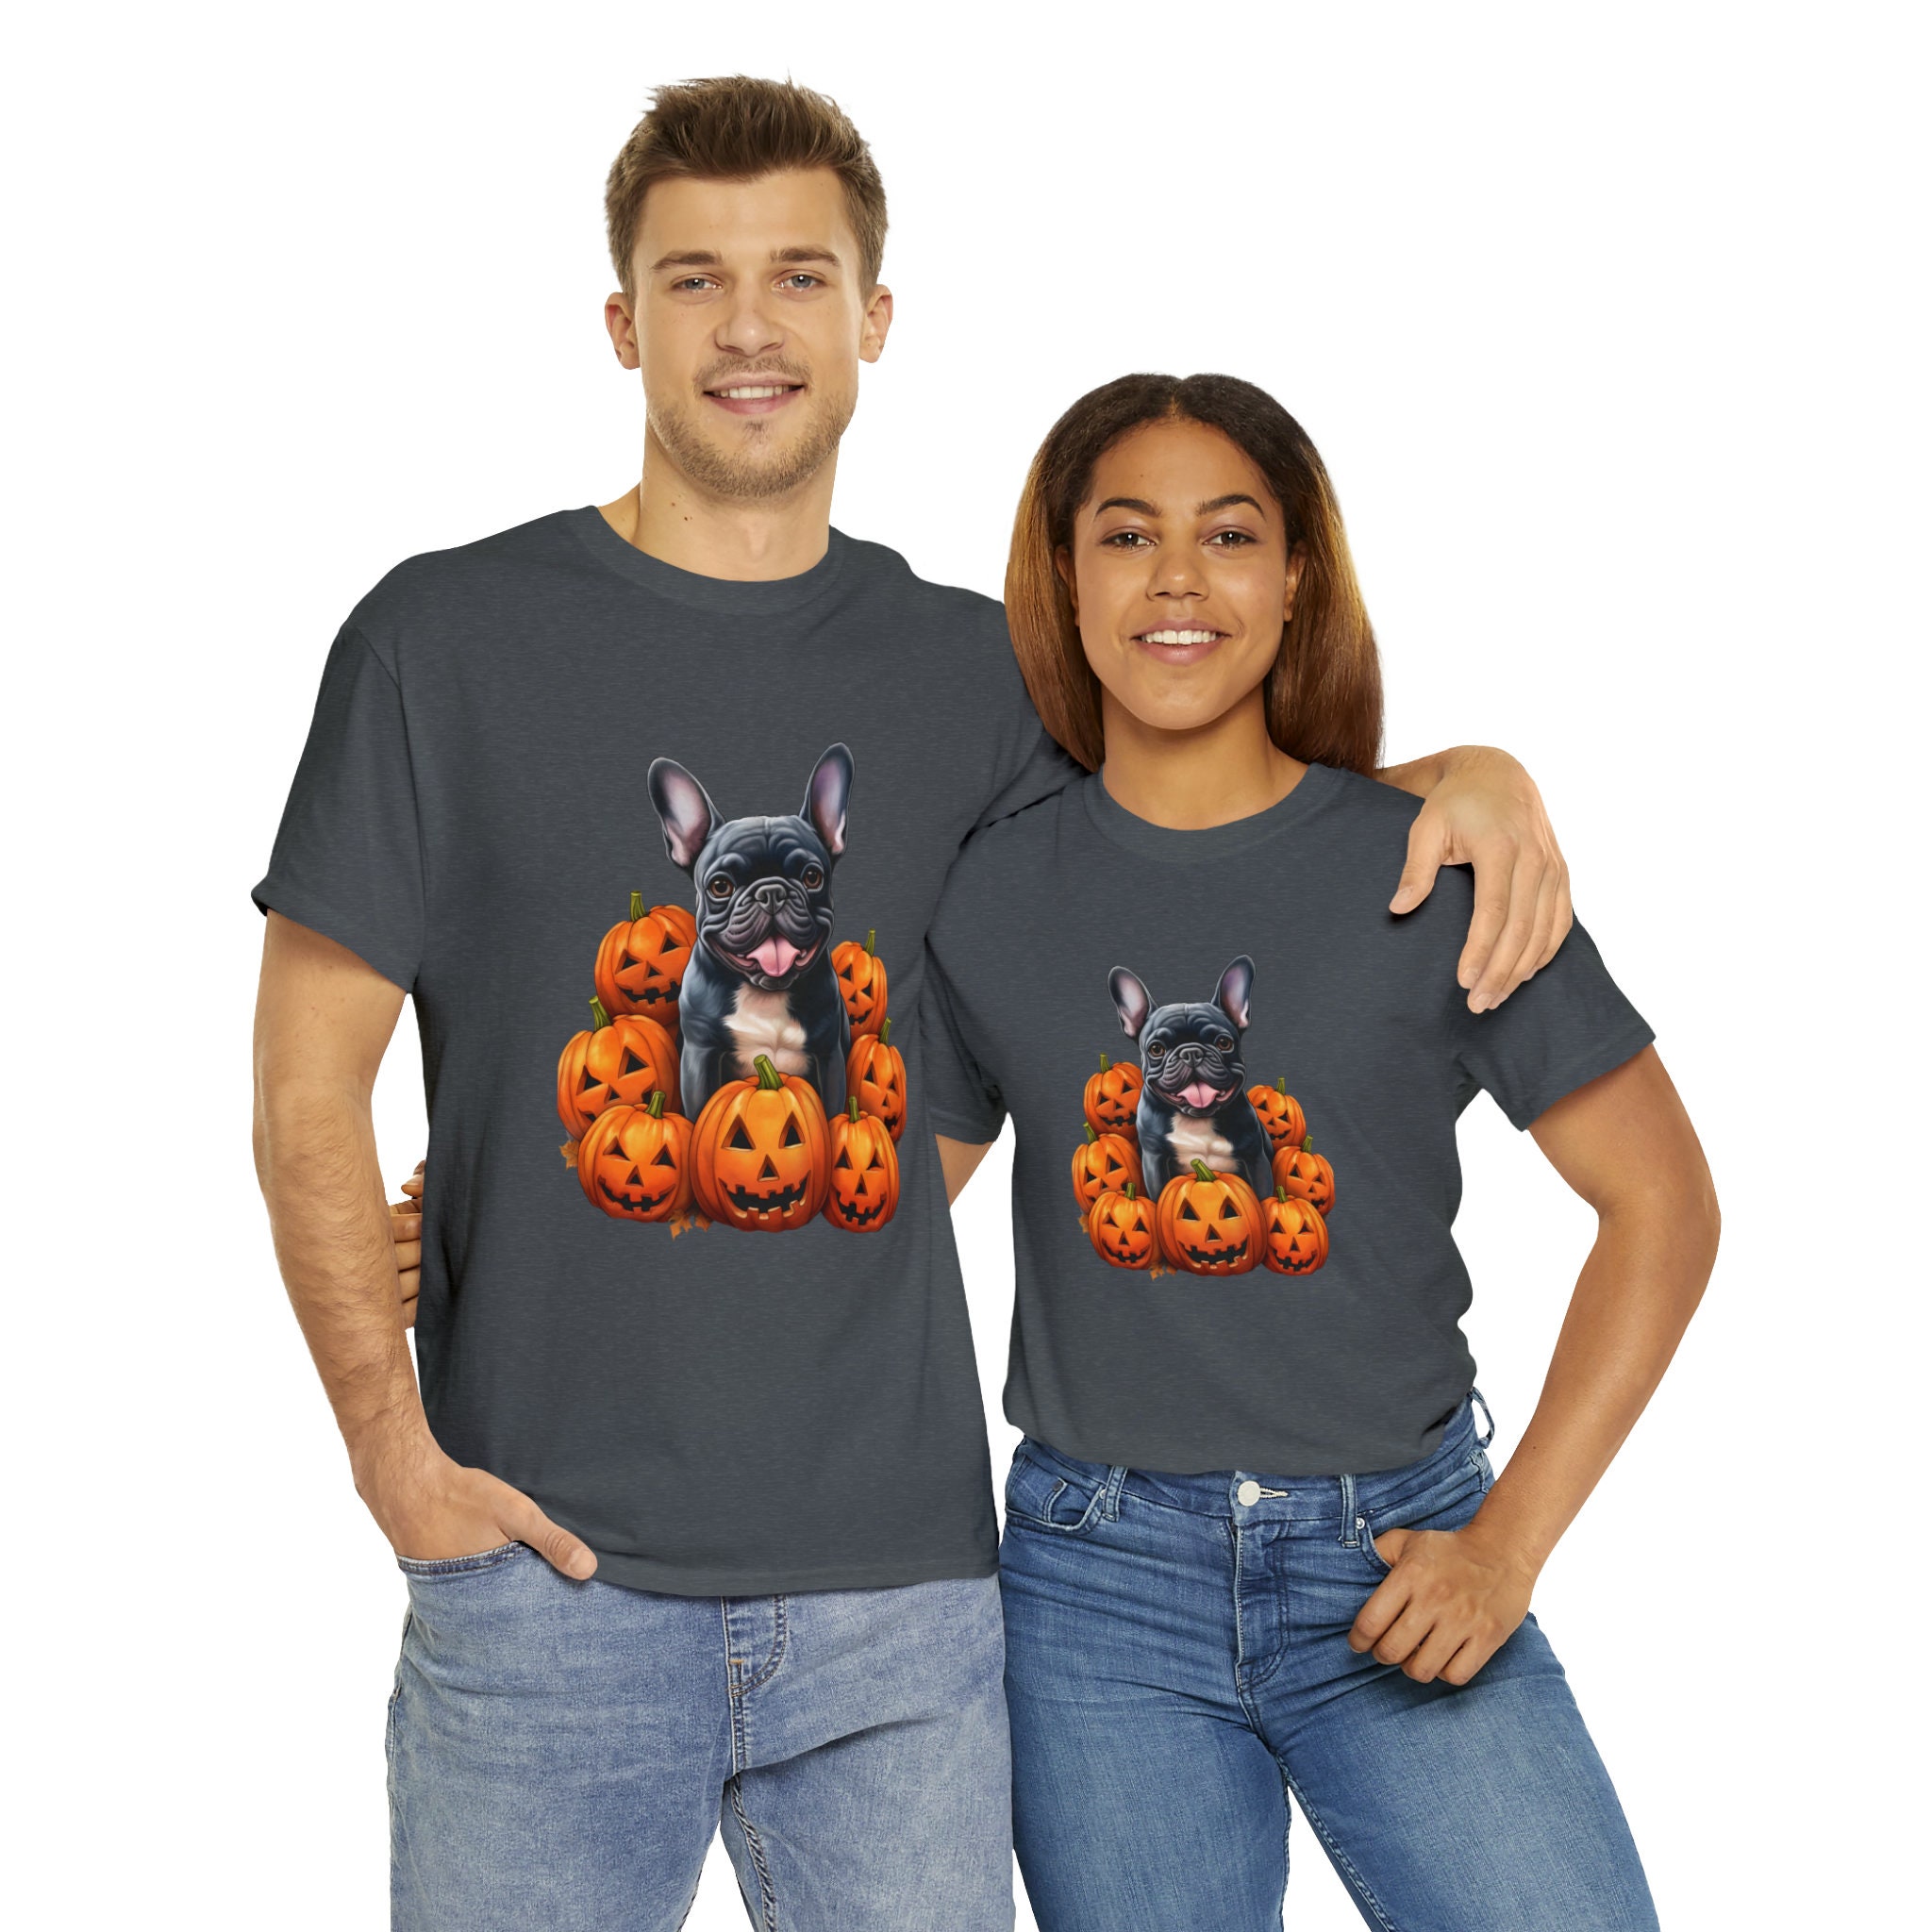 Discover Unisex Funny Halloween French Bulldog T shirt  Loose Fit Mens Silly Humor Tshirt  Womens Dog Funny Frenchie Tee  Cute Pumpkin Scary Top